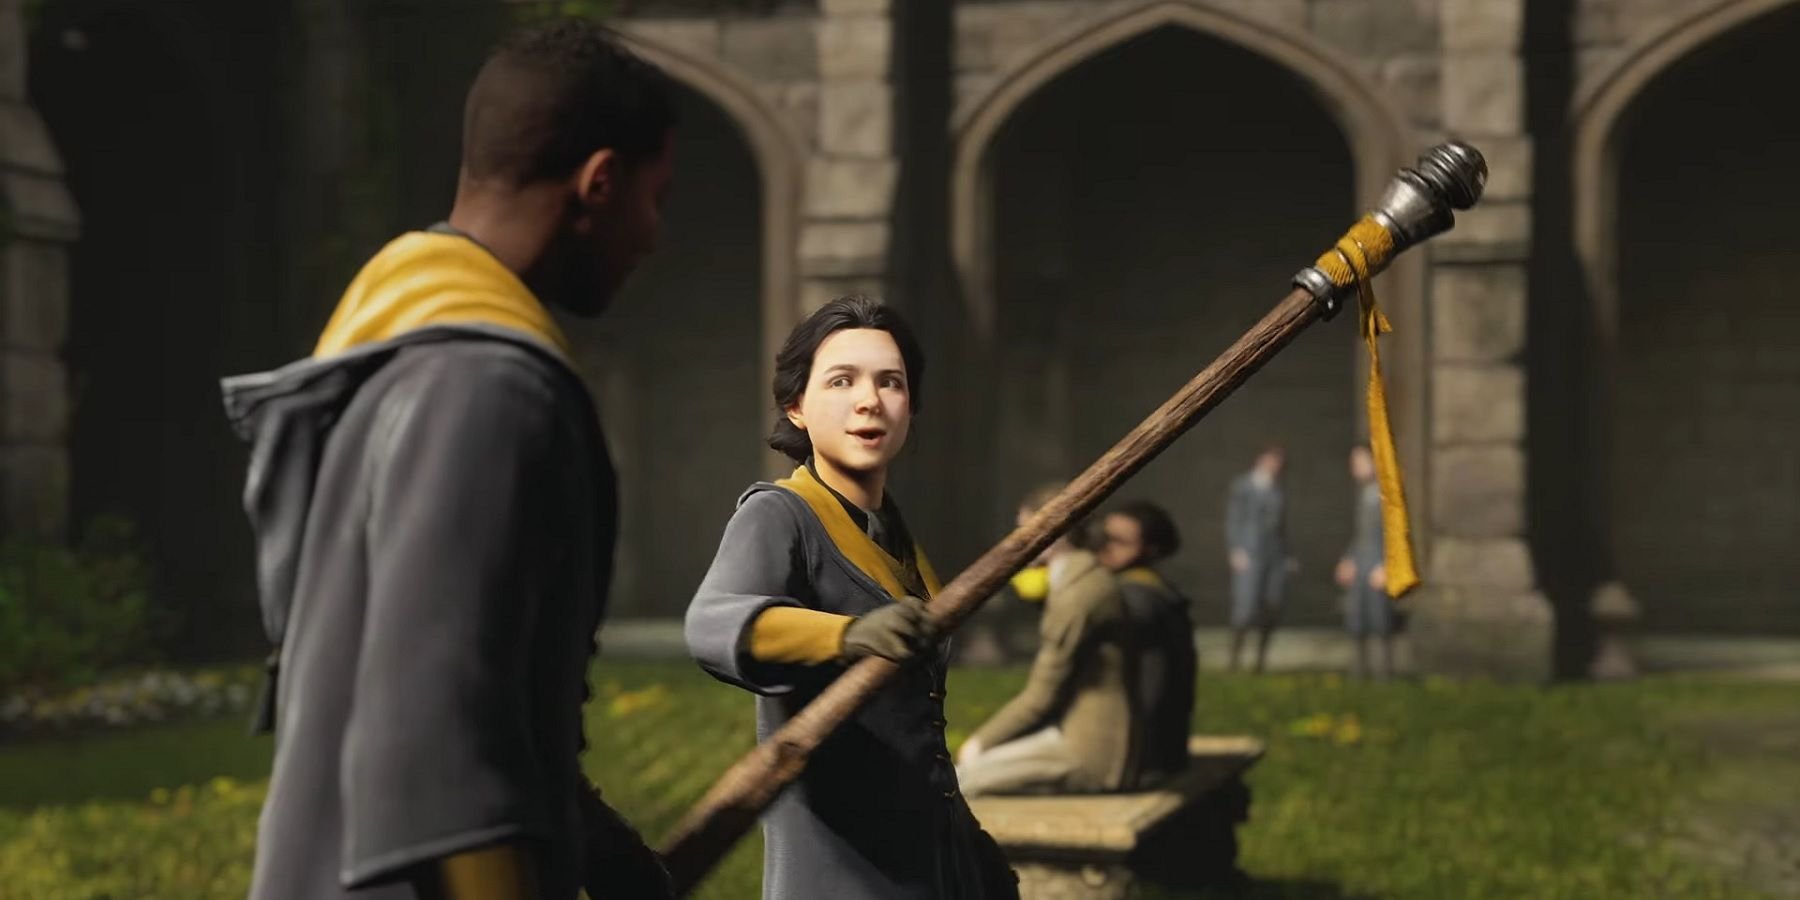 Leaker Says Hogwarts Legacy Development is 'Going Well' and Will Release in Q3